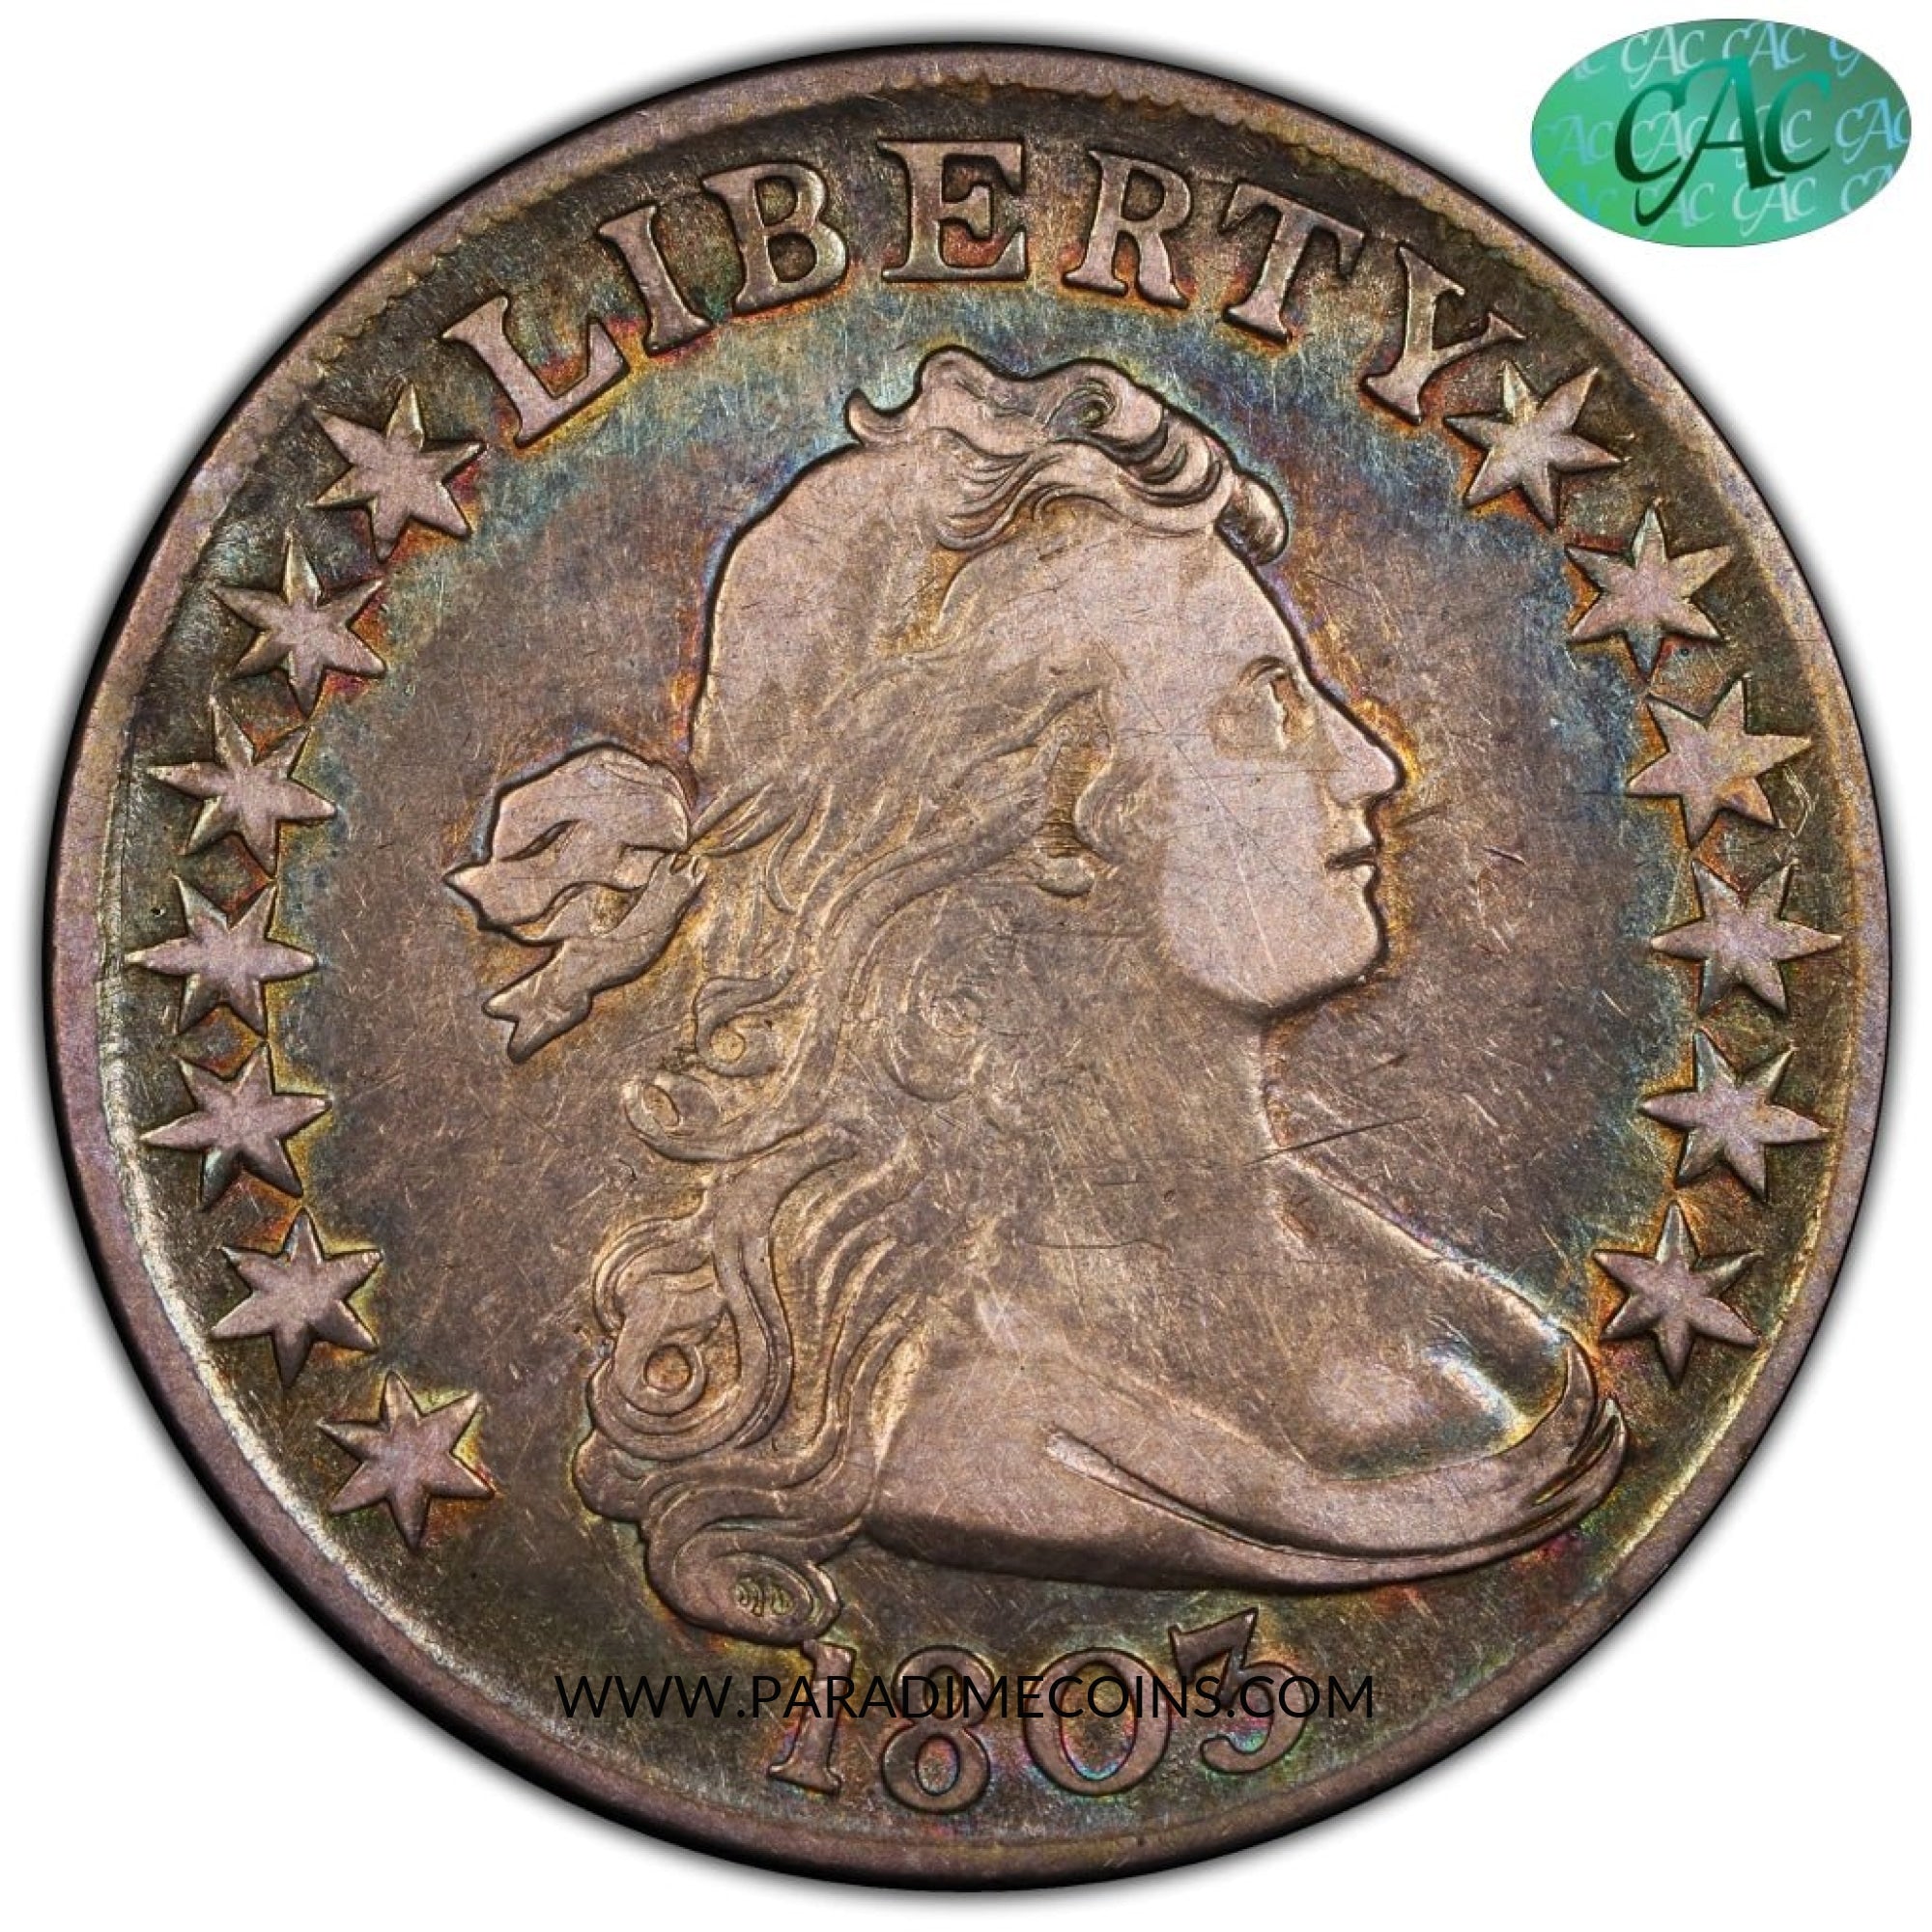 1803 50C LARGE 3 VF35 PCGS CAC - Paradime Coins | PCGS NGC CACG CAC Rare US Numismatic Coins For Sale